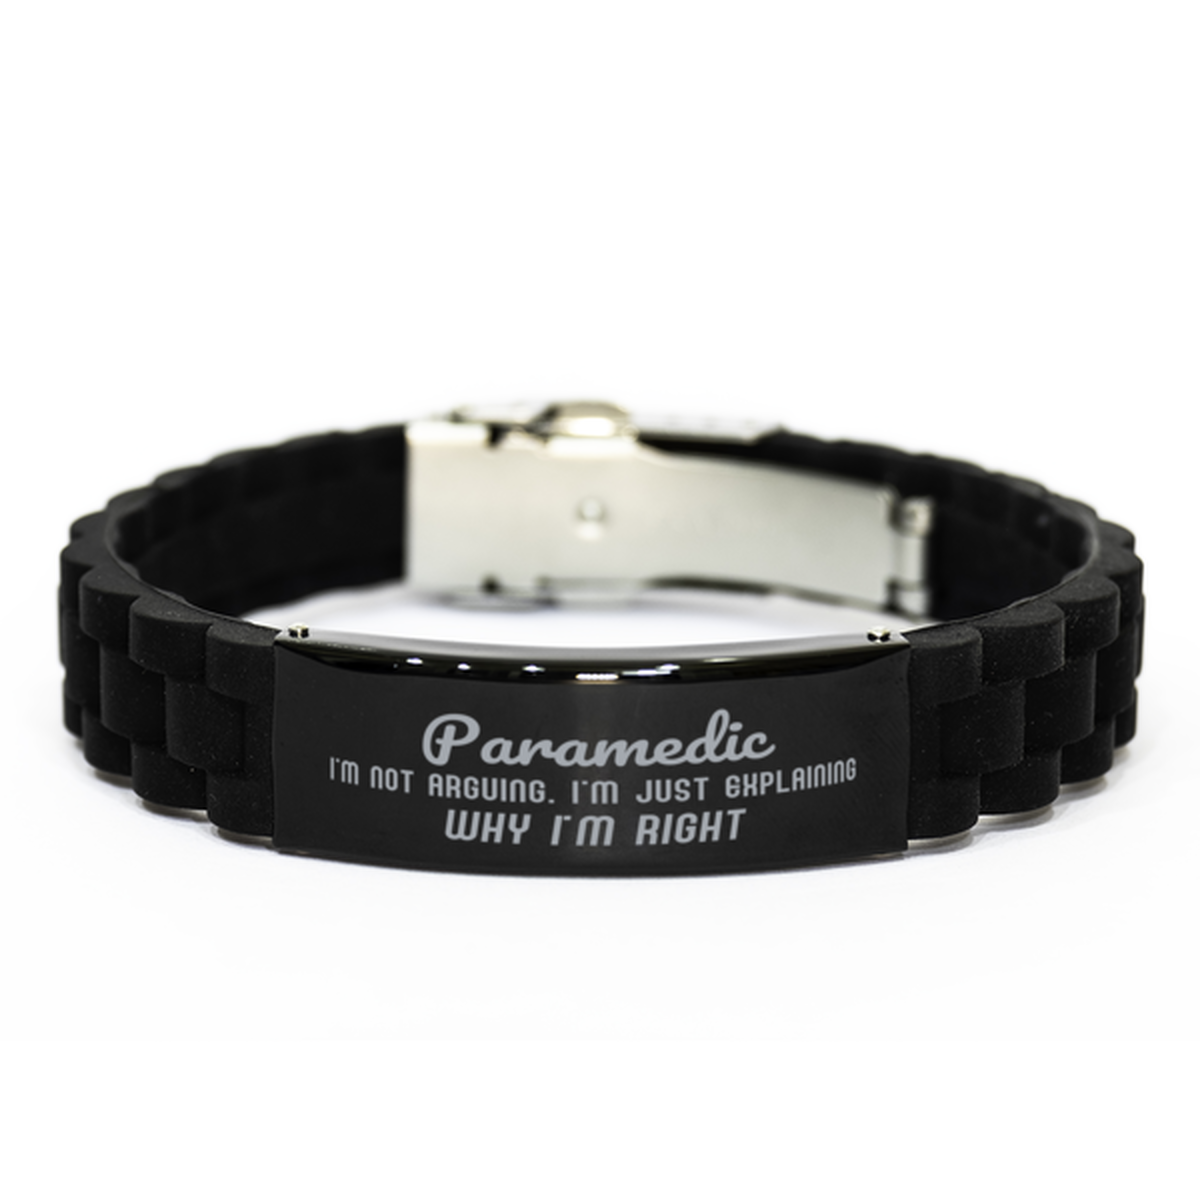 Paramedic I'm not Arguing. I'm Just Explaining Why I'm RIGHT Black Glidelock Clasp Bracelet, Funny Saying Quote Paramedic Gifts For Paramedic Graduation Birthday Christmas Gifts for Men Women Coworker